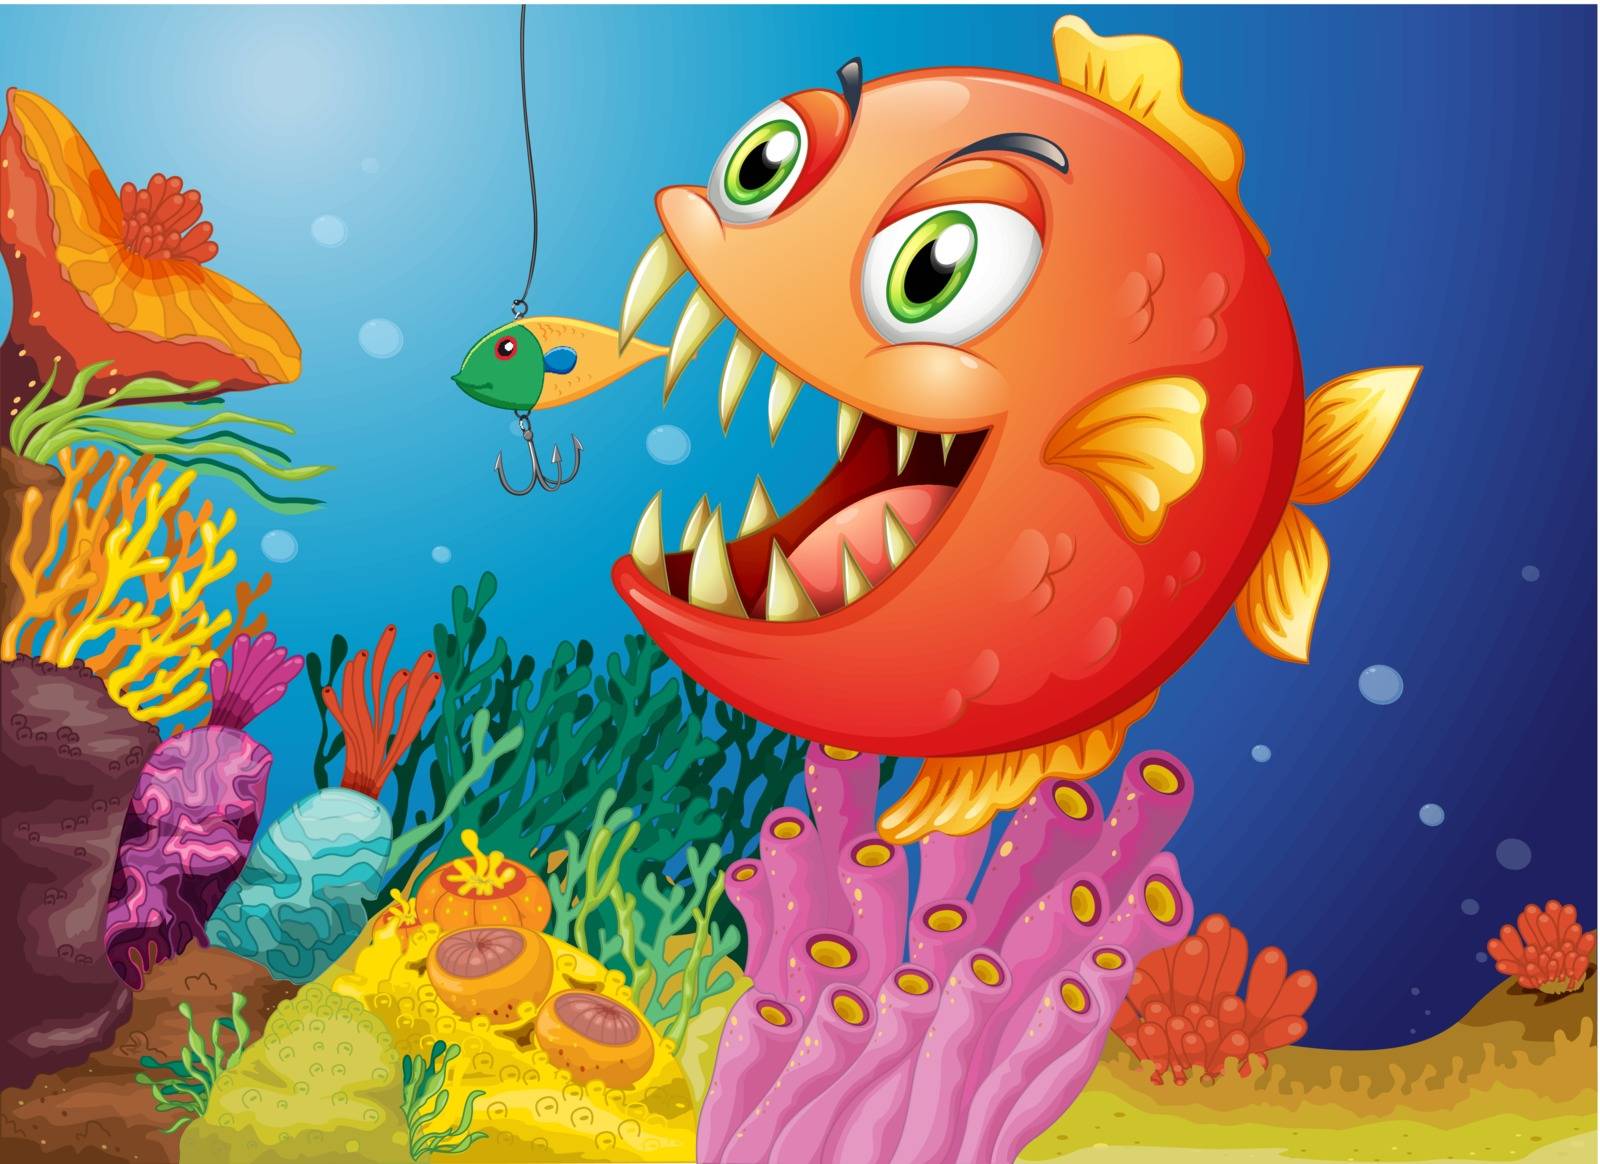 A piranha under the sea by iimages